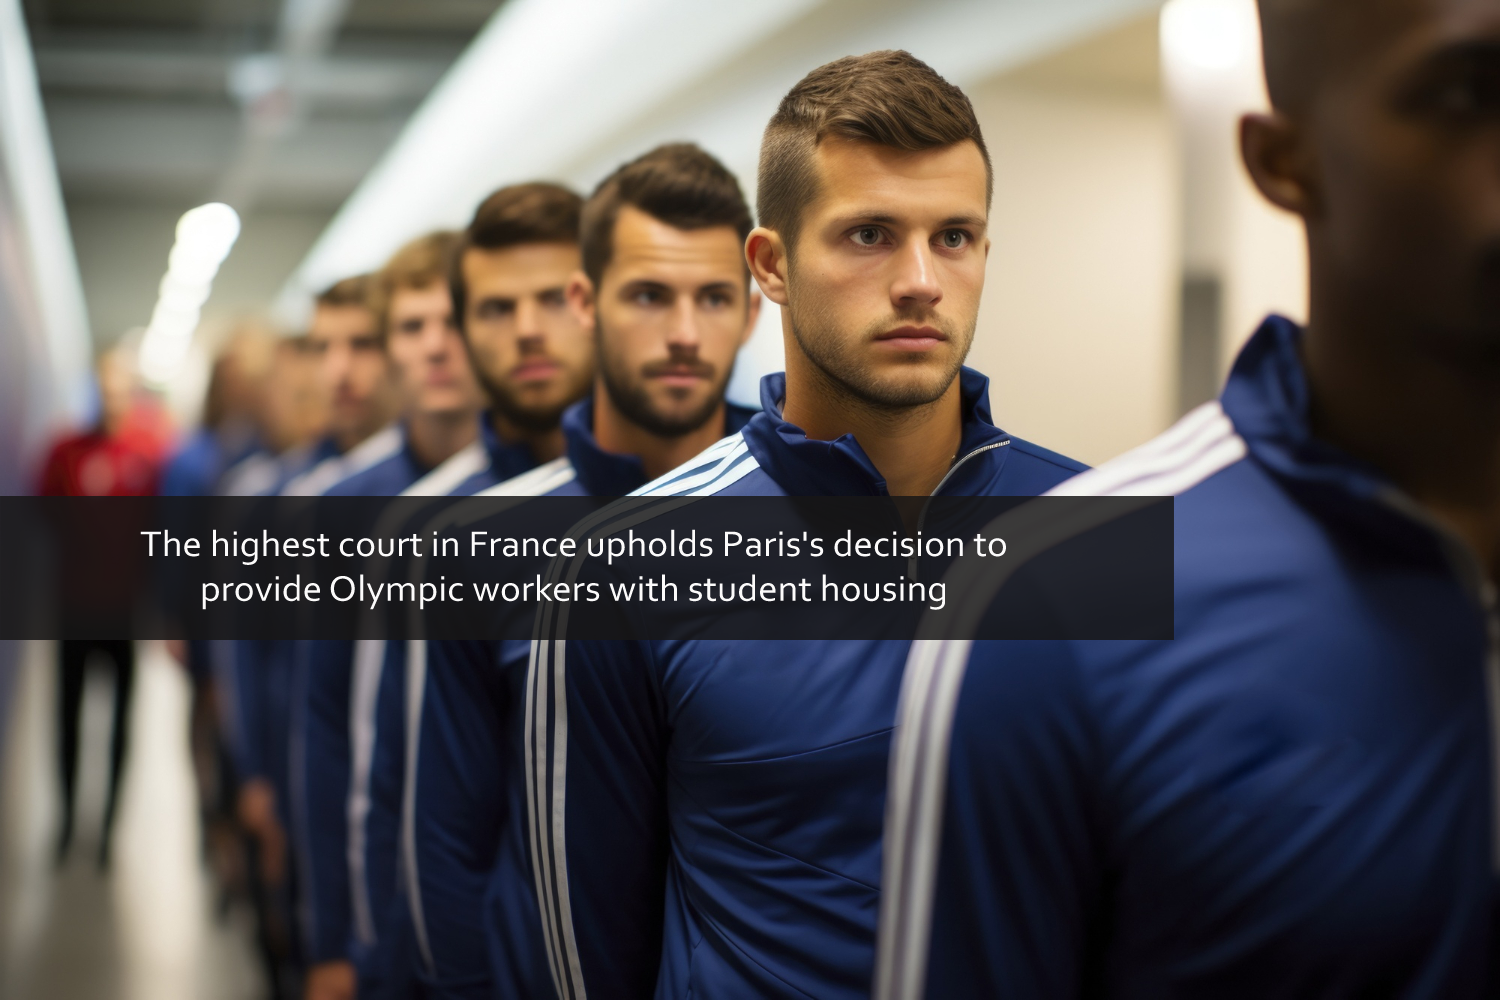 The highest court in France upholds Paris's decision to provide Olympic workers with student housing.